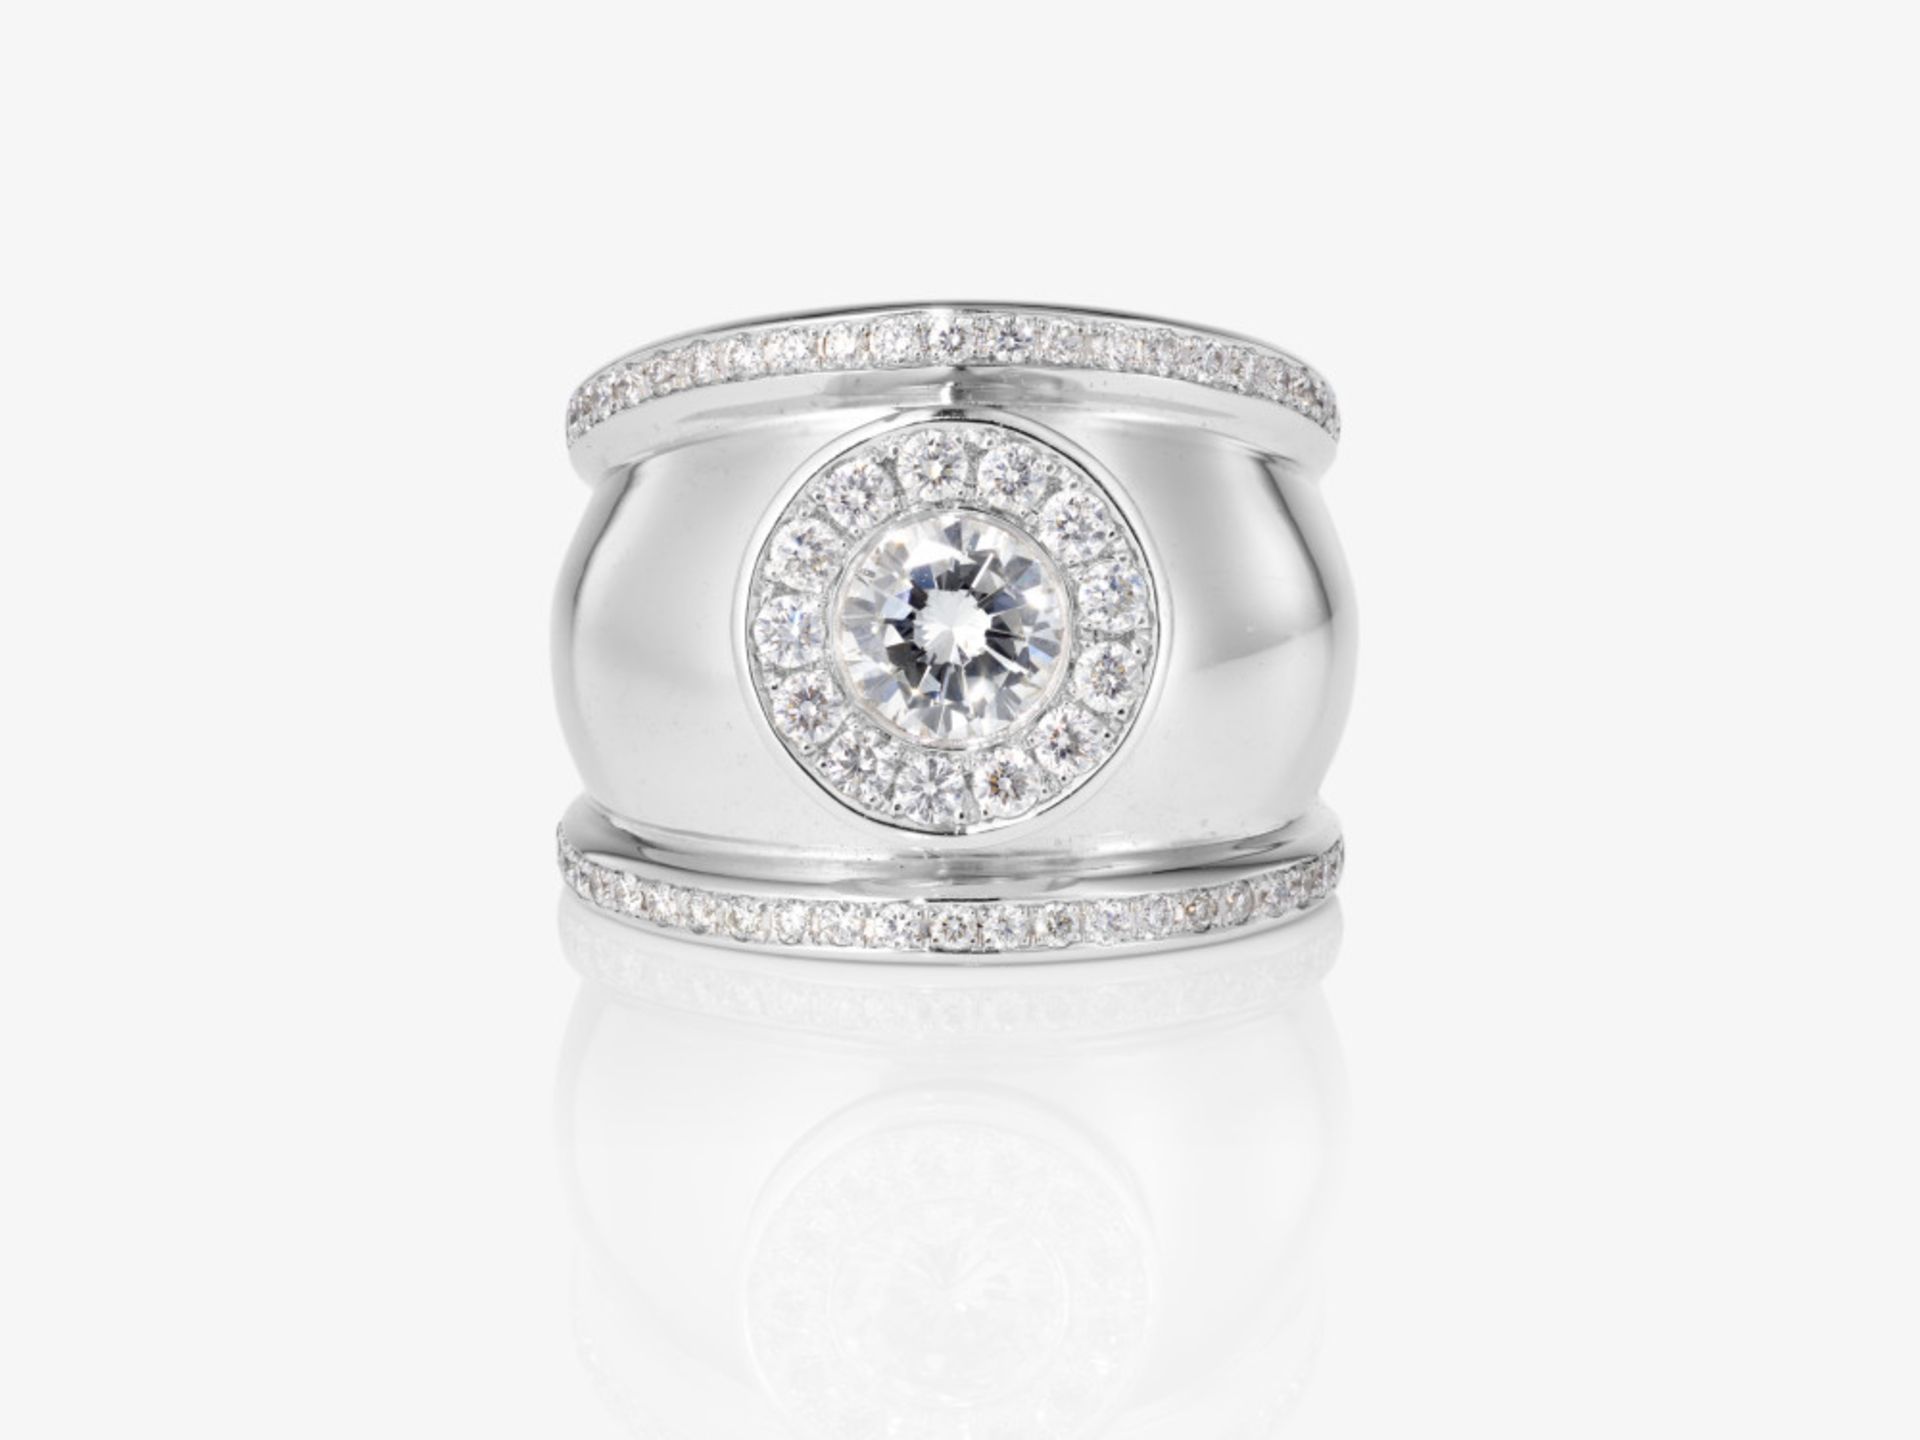 A magnificent cocktail ring decorated with brilliant-cut diamonds - Germany - Image 2 of 2